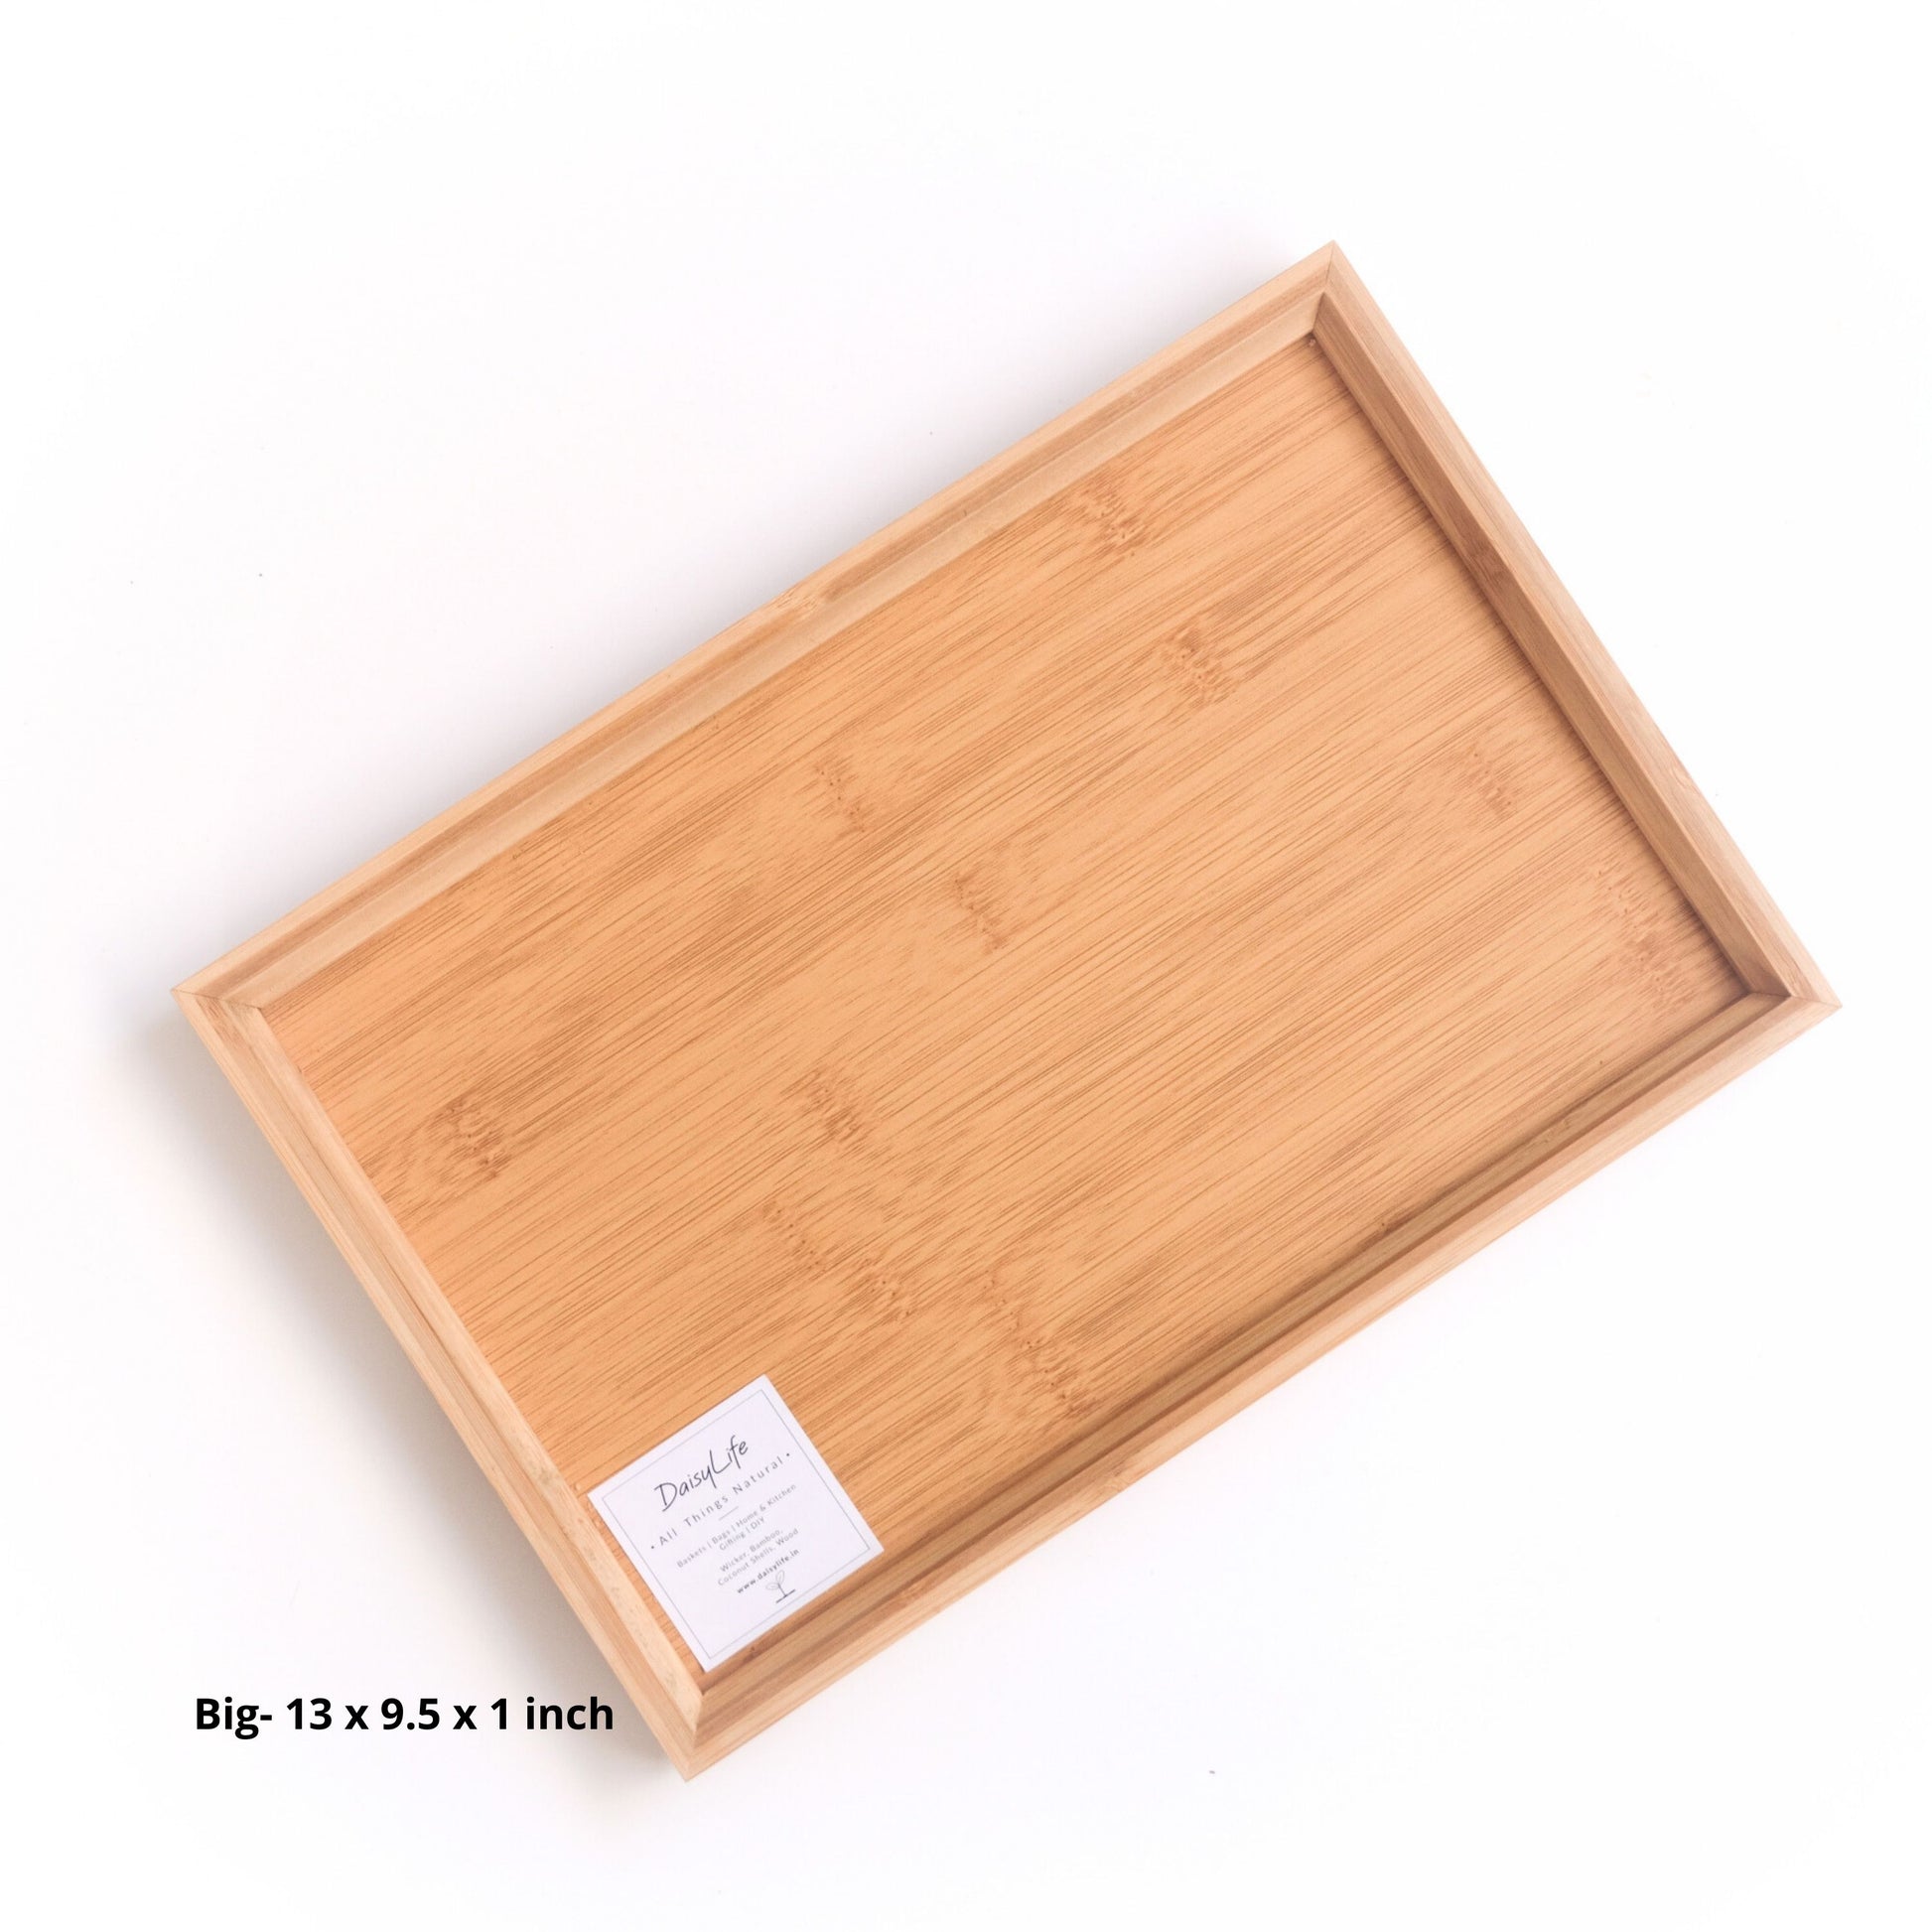 DAISYLIFE Natural and Eco-Friendly Bamboo Tea/ Coffee / Snacks / Food Serving Tray for guests or everyday use